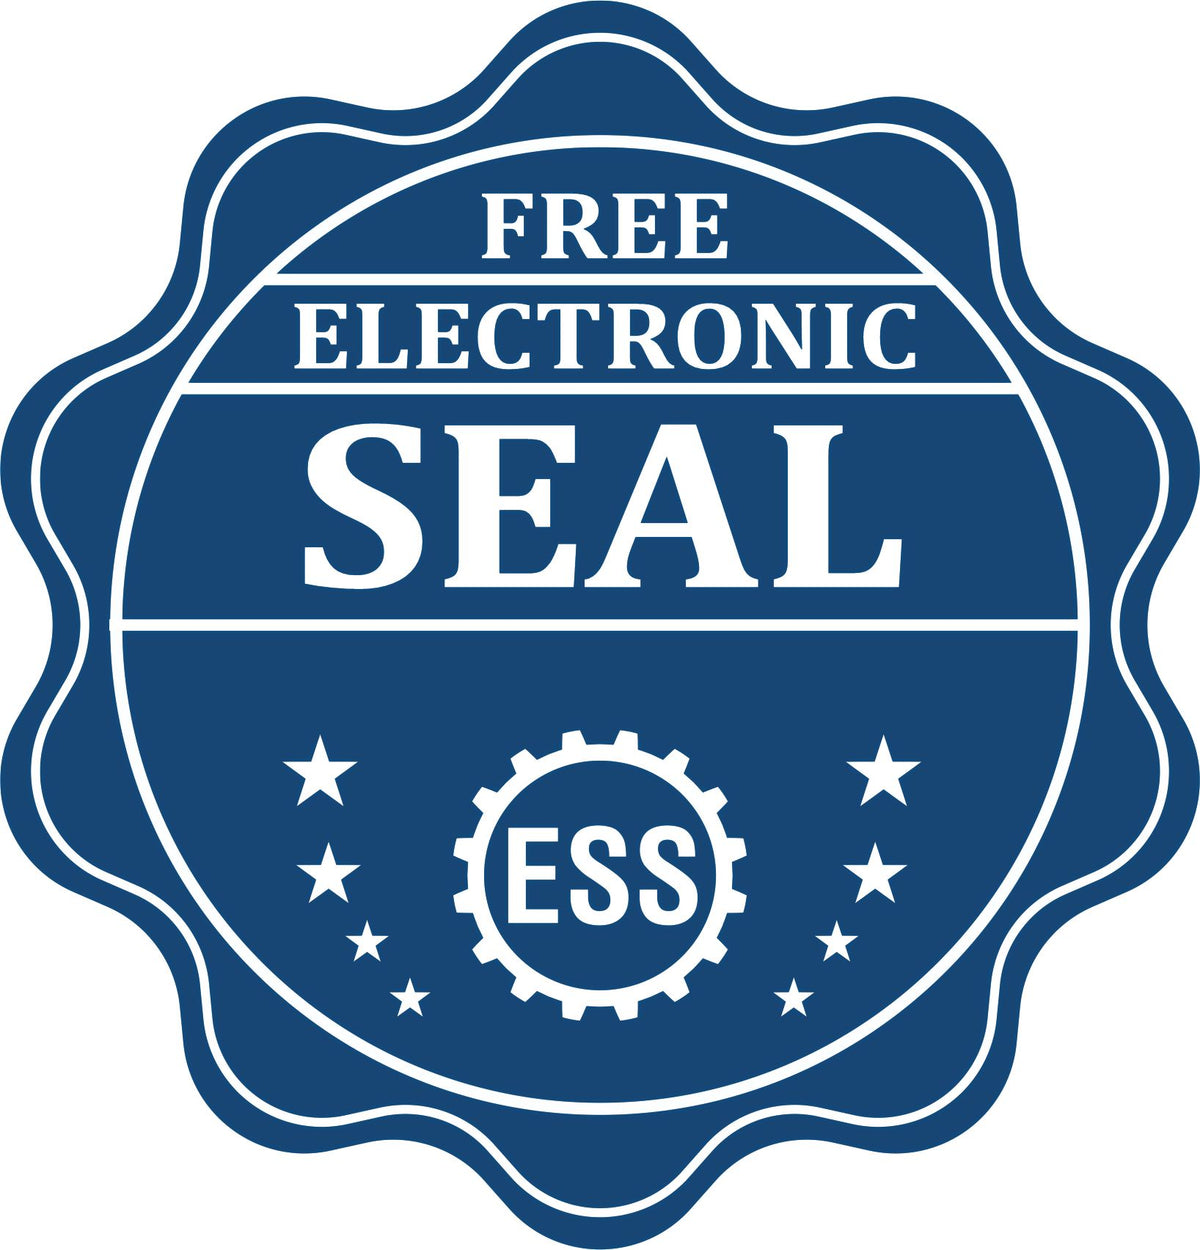 A badge showing a free electronic seal for the MaxLight Premium Pre-Inked New Hampshire State Seal Notarial Stamp with stars and the ESS gear on the emblem.